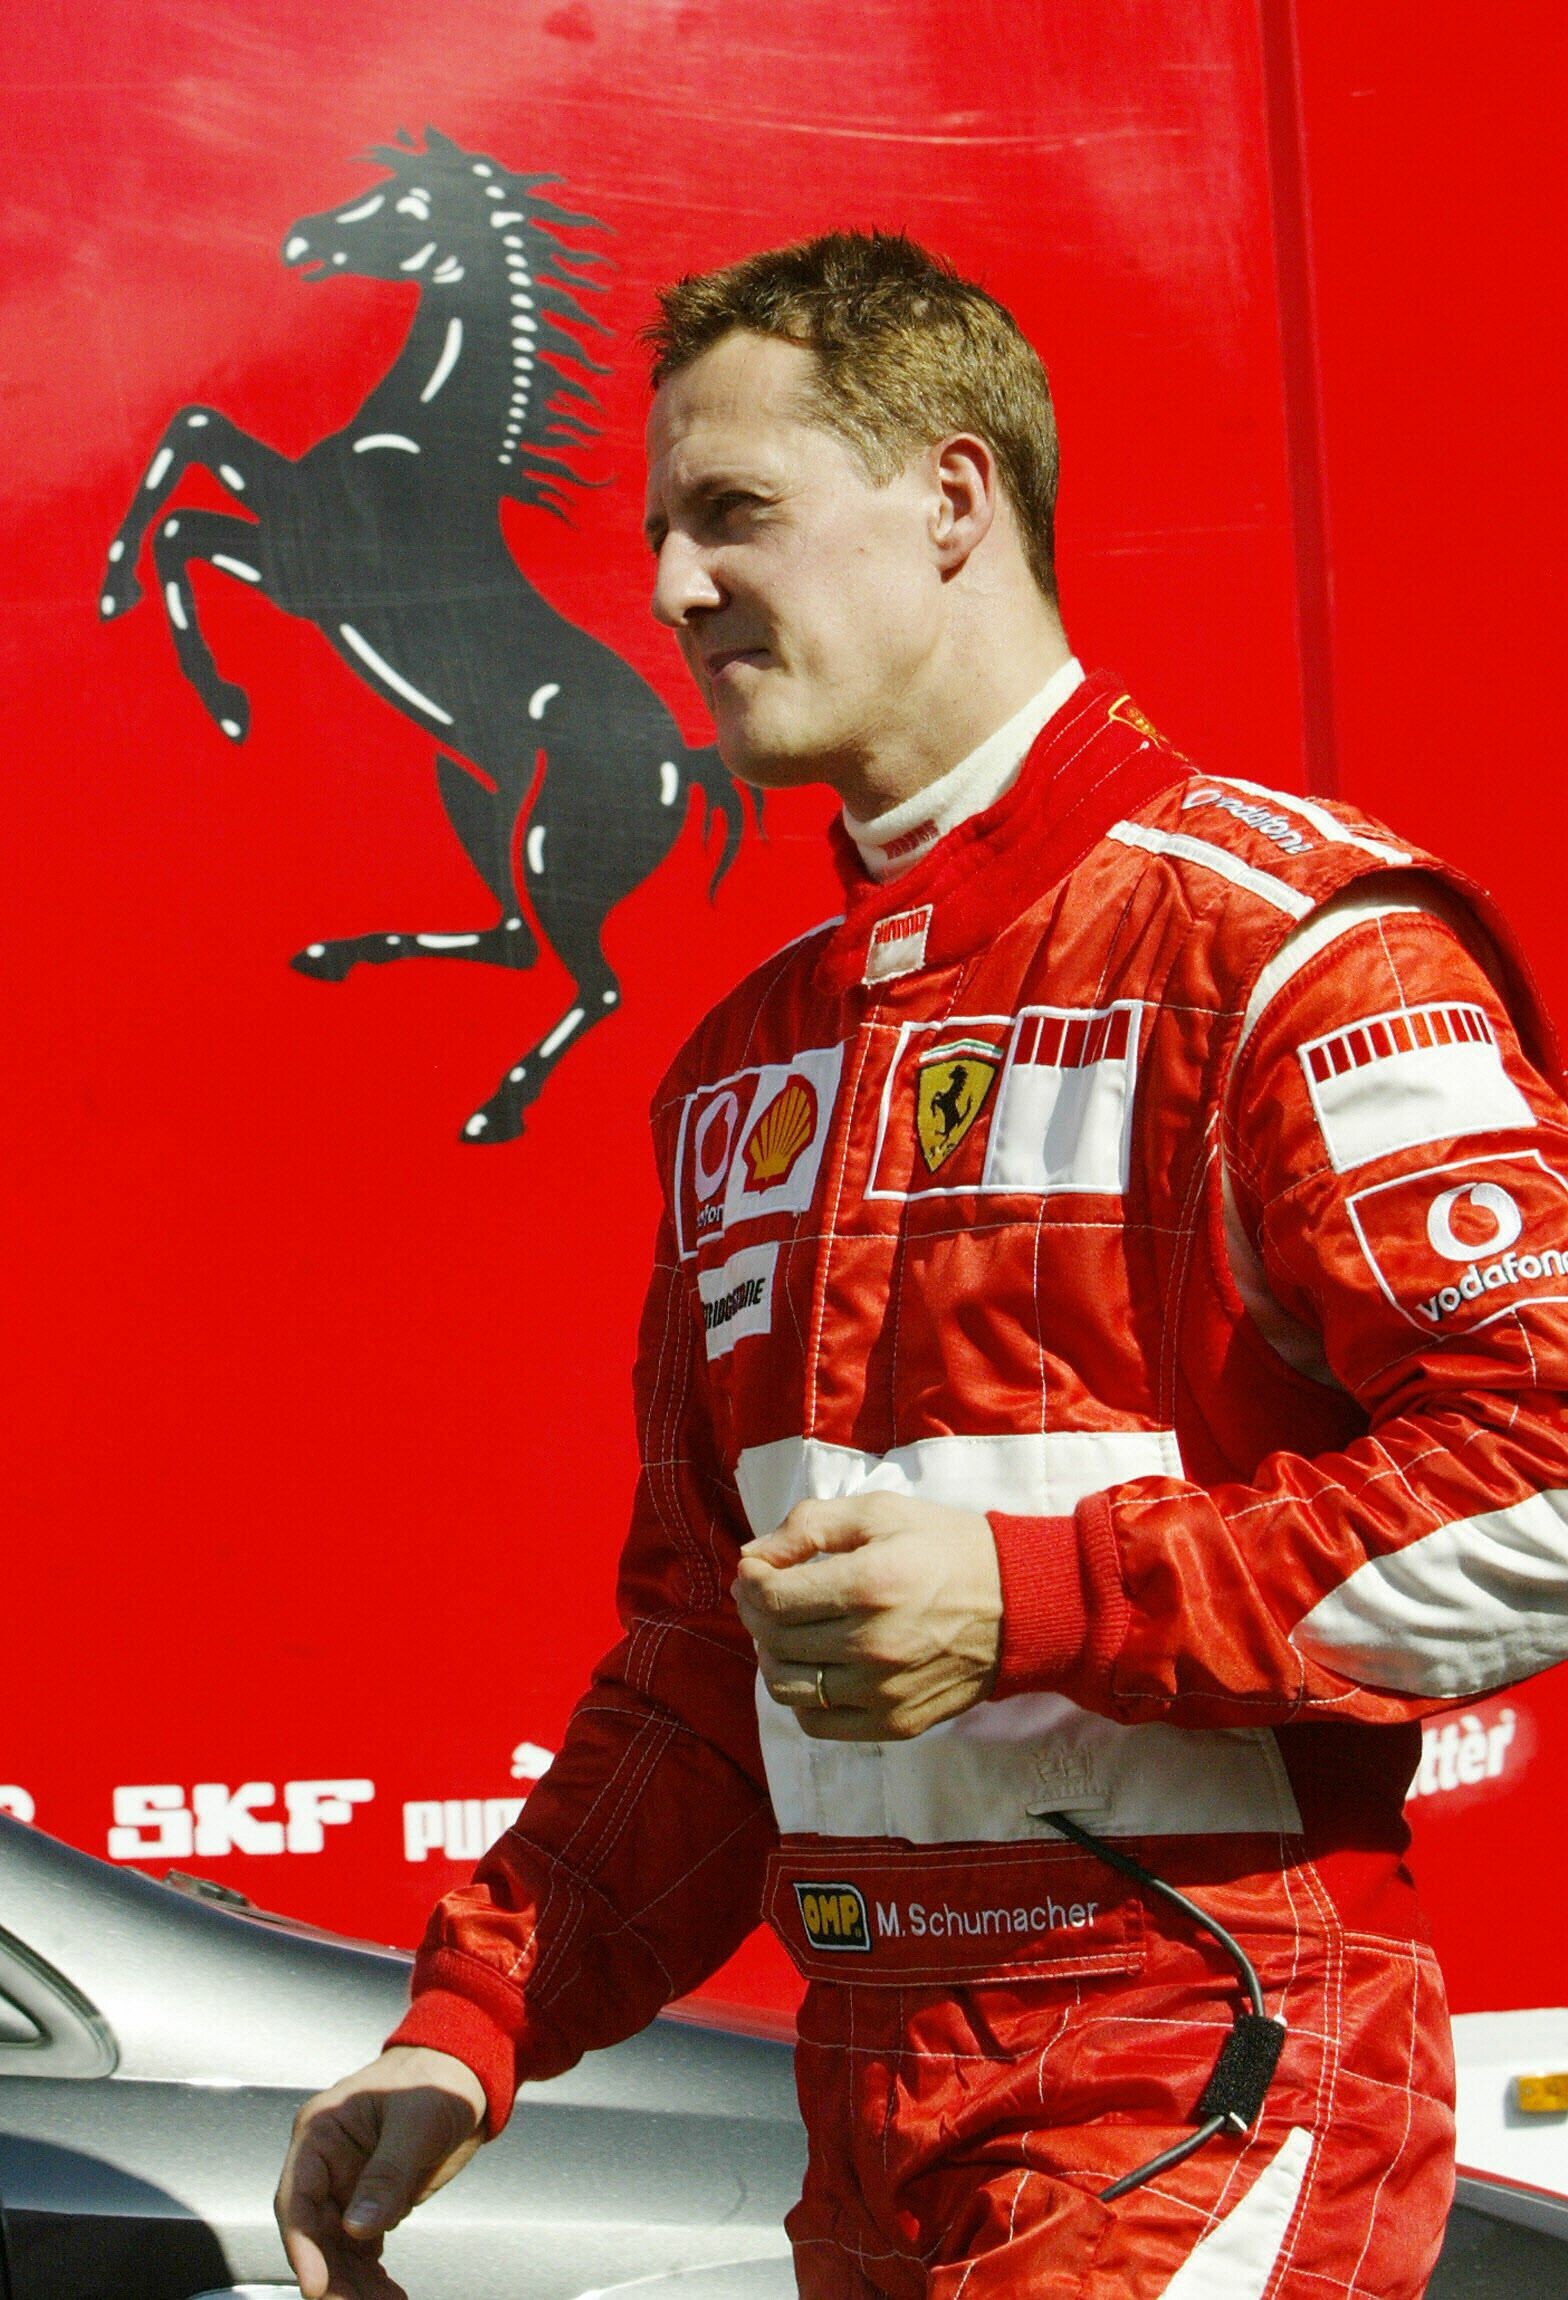 Michael Schumacher: German F1 racer, has dominated the racing world during his career. 1570x2300 HD Background.